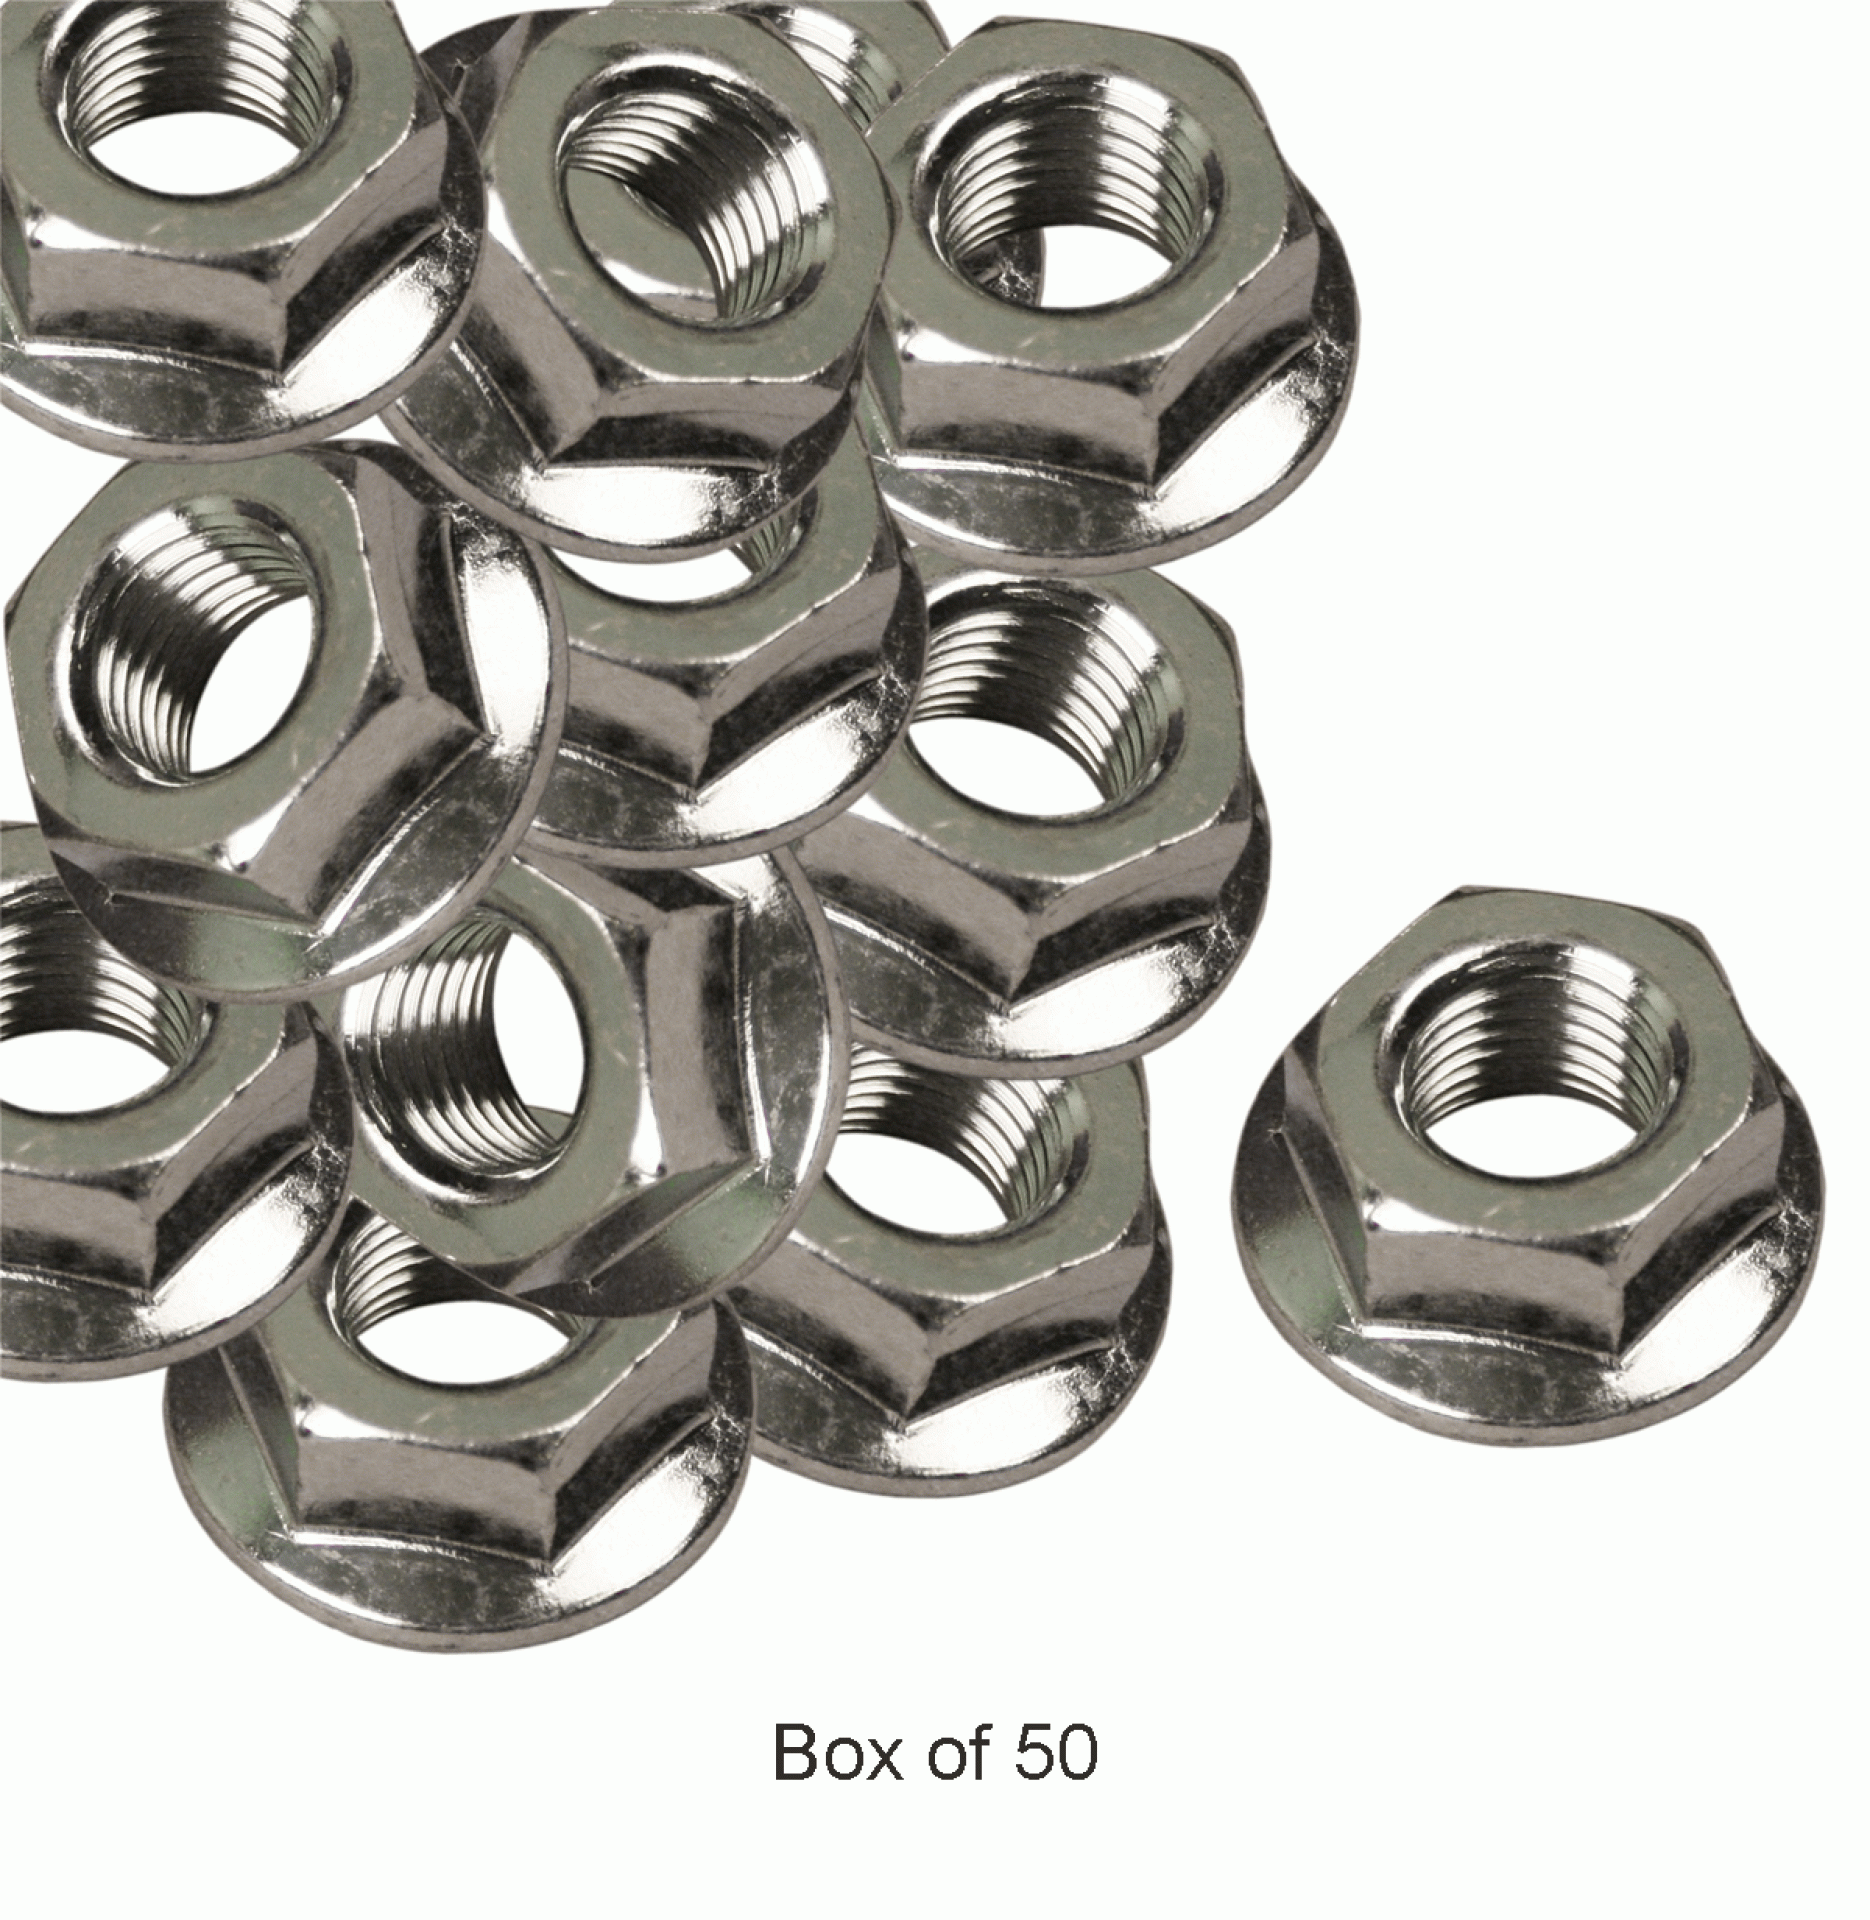 N TOW | 0011 | LOCK NUTS FOR WET BOLT 7/16"- 20 Thread (Box of 50)